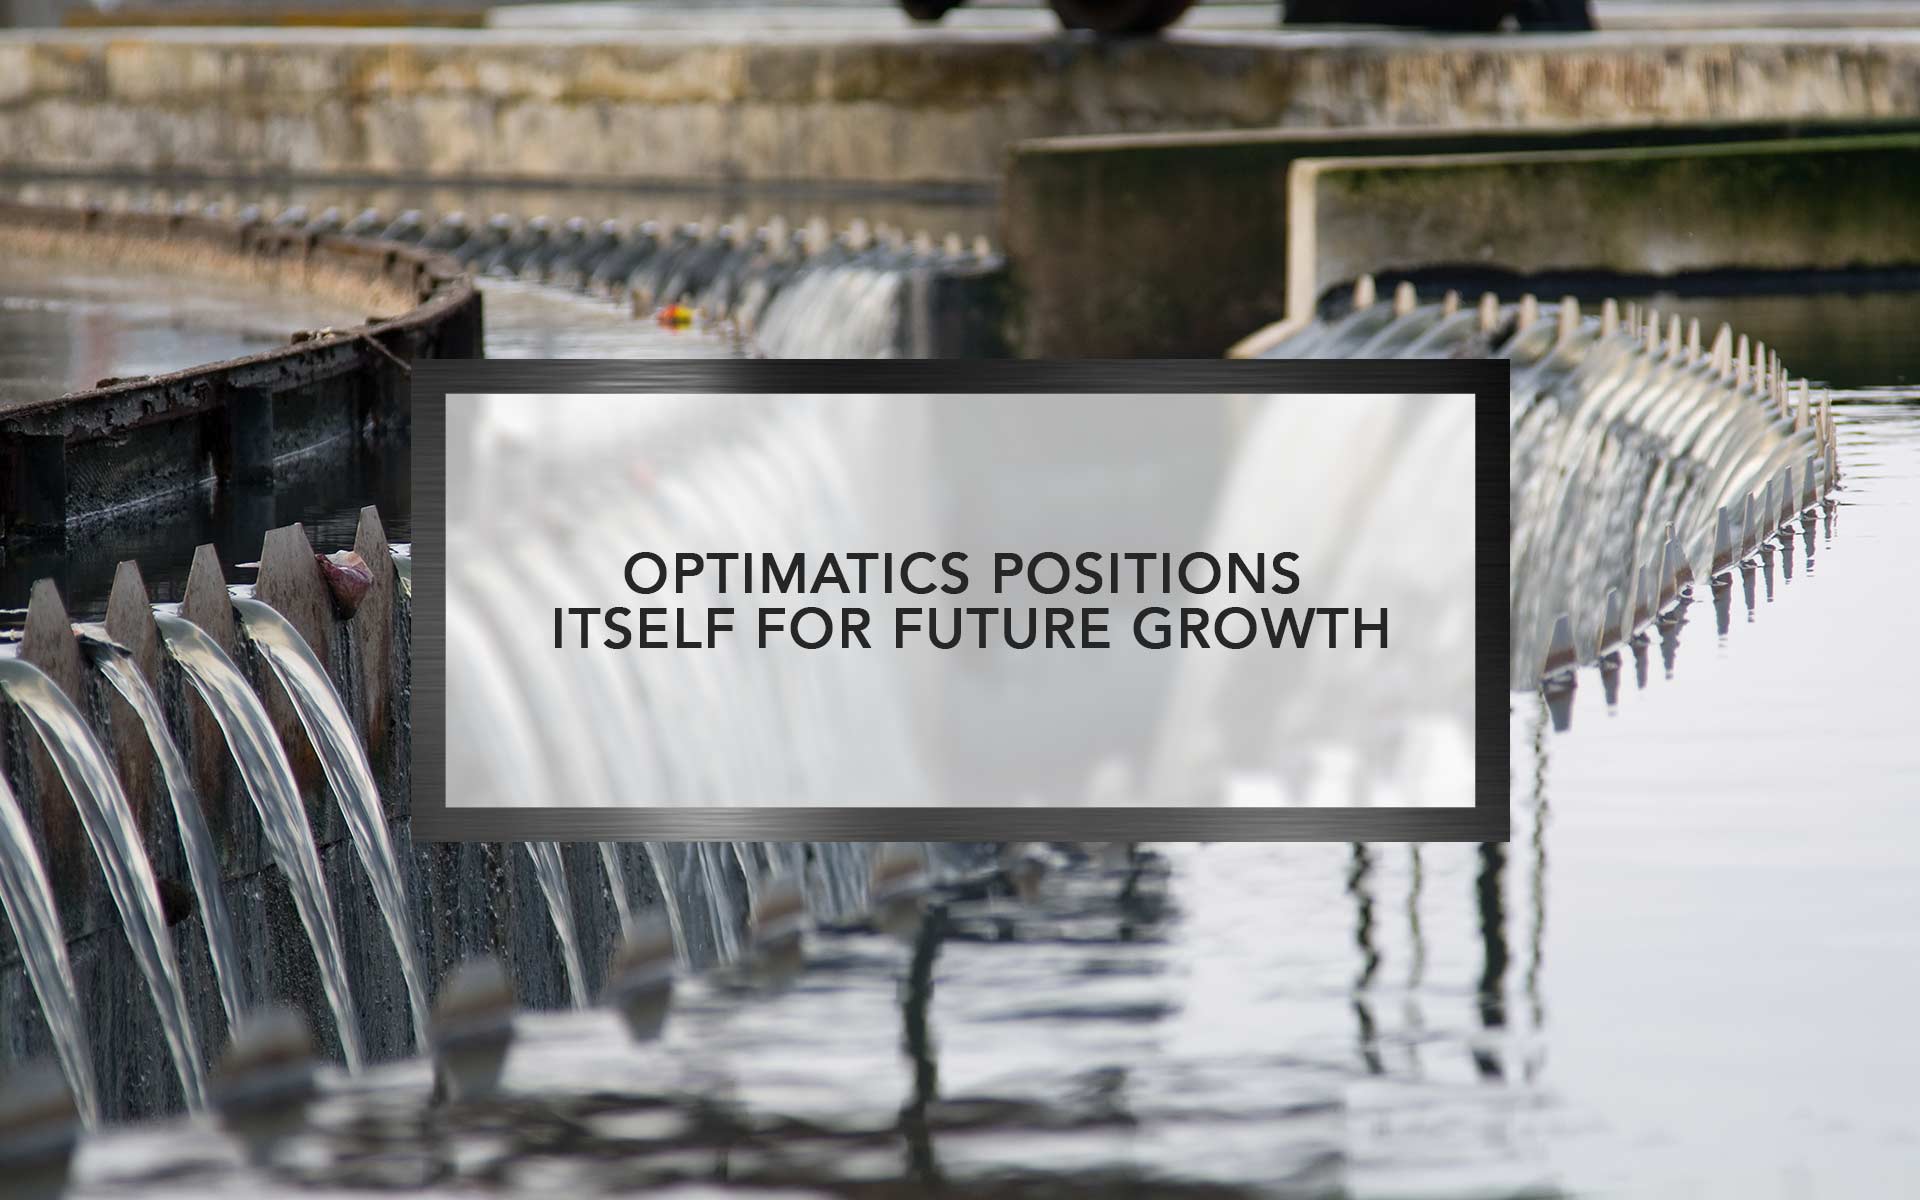 Optimatics positions itself for future growth